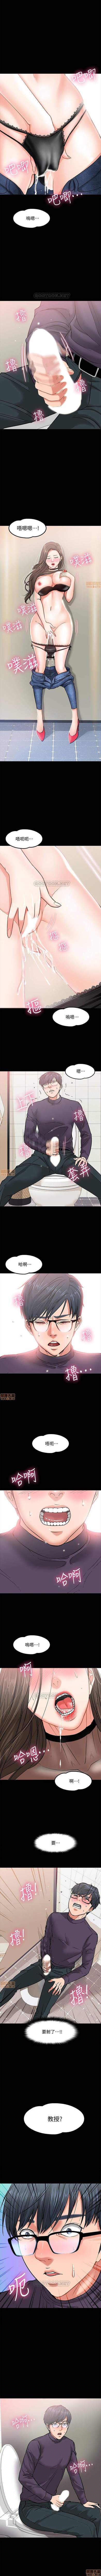 Cum Shot PROFESSOR, ARE YOU JUST GOING TO LOOK AT ME? | DESIRE SWAMP | 教授，你還等什麼? Ch. 3 [Chinese] Manhwa Threeway - Page 7